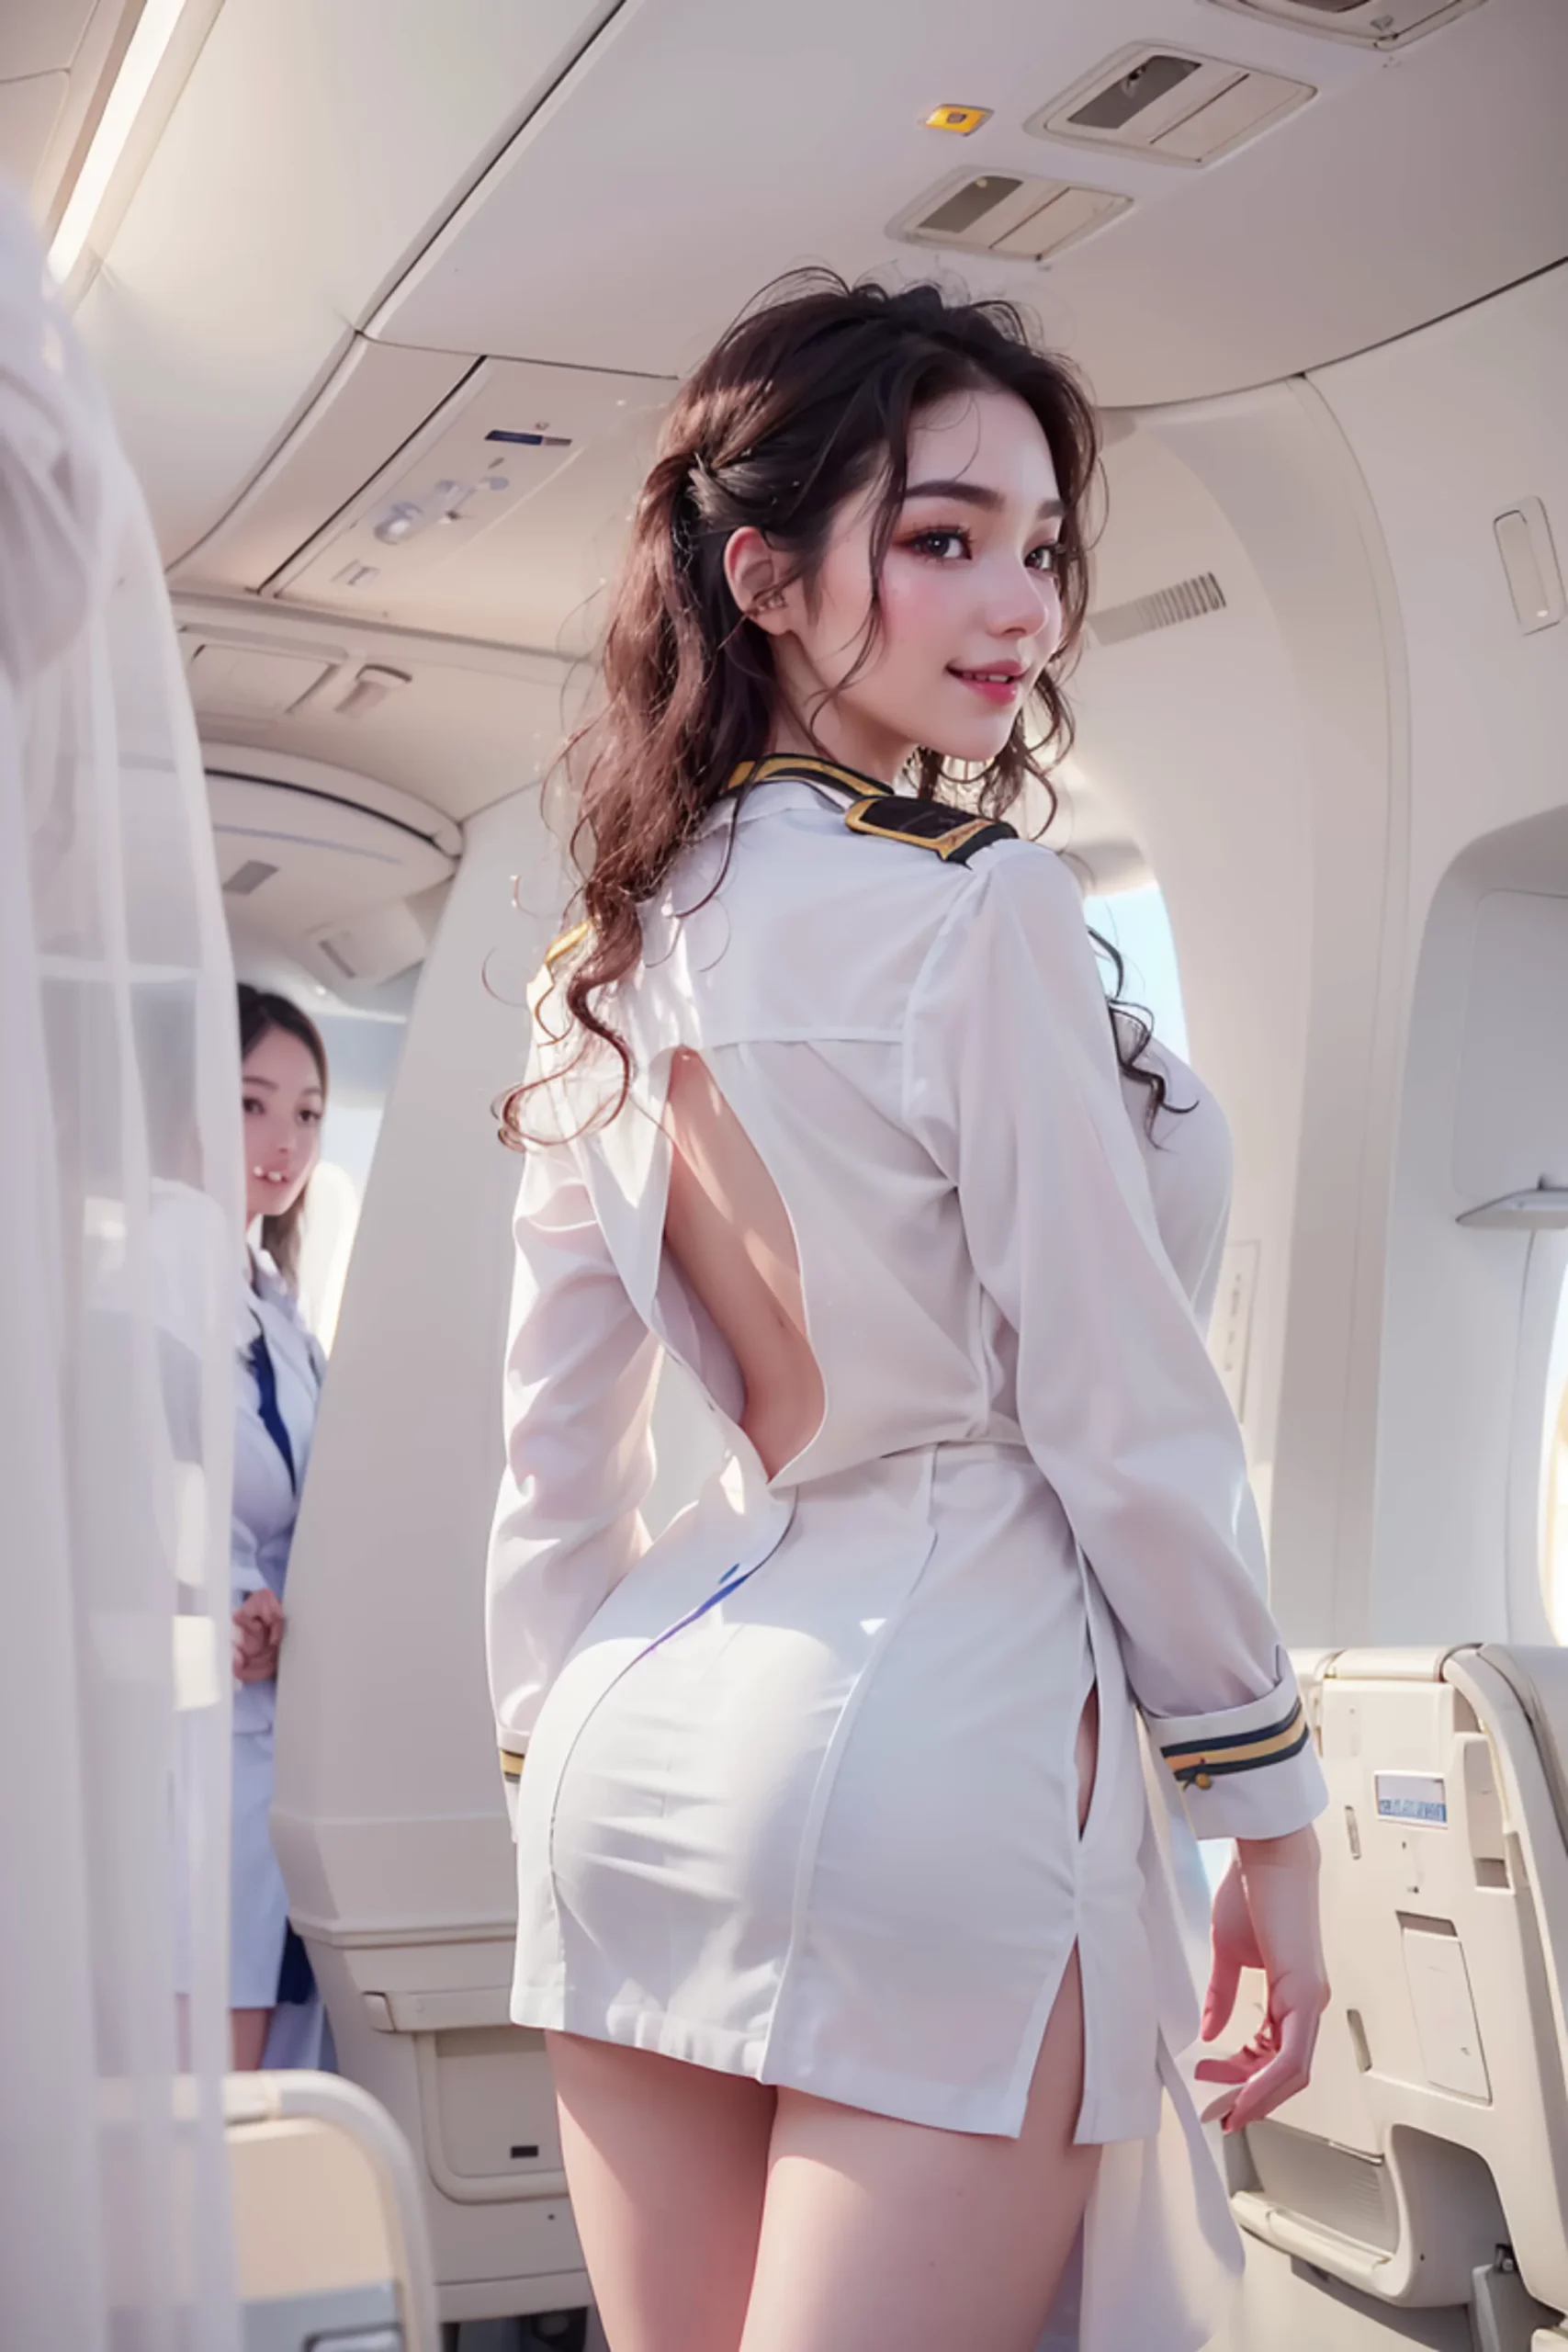 Sexy Flight Attendant Cosplay Vol. 2 Images 30